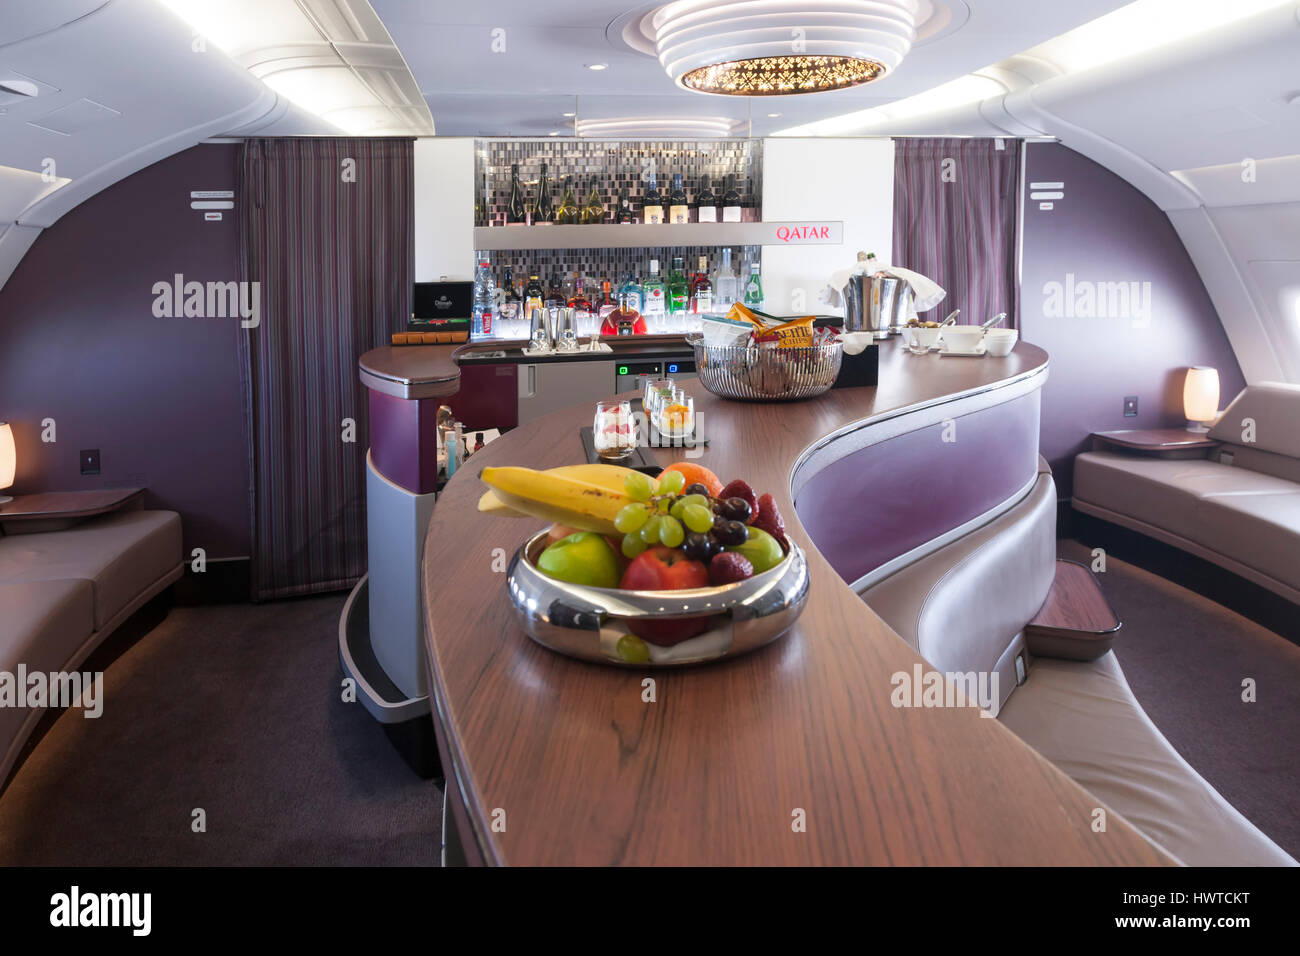 Qatar Airways, Business class lounge onboard Airbus A380-800. Stock Photo